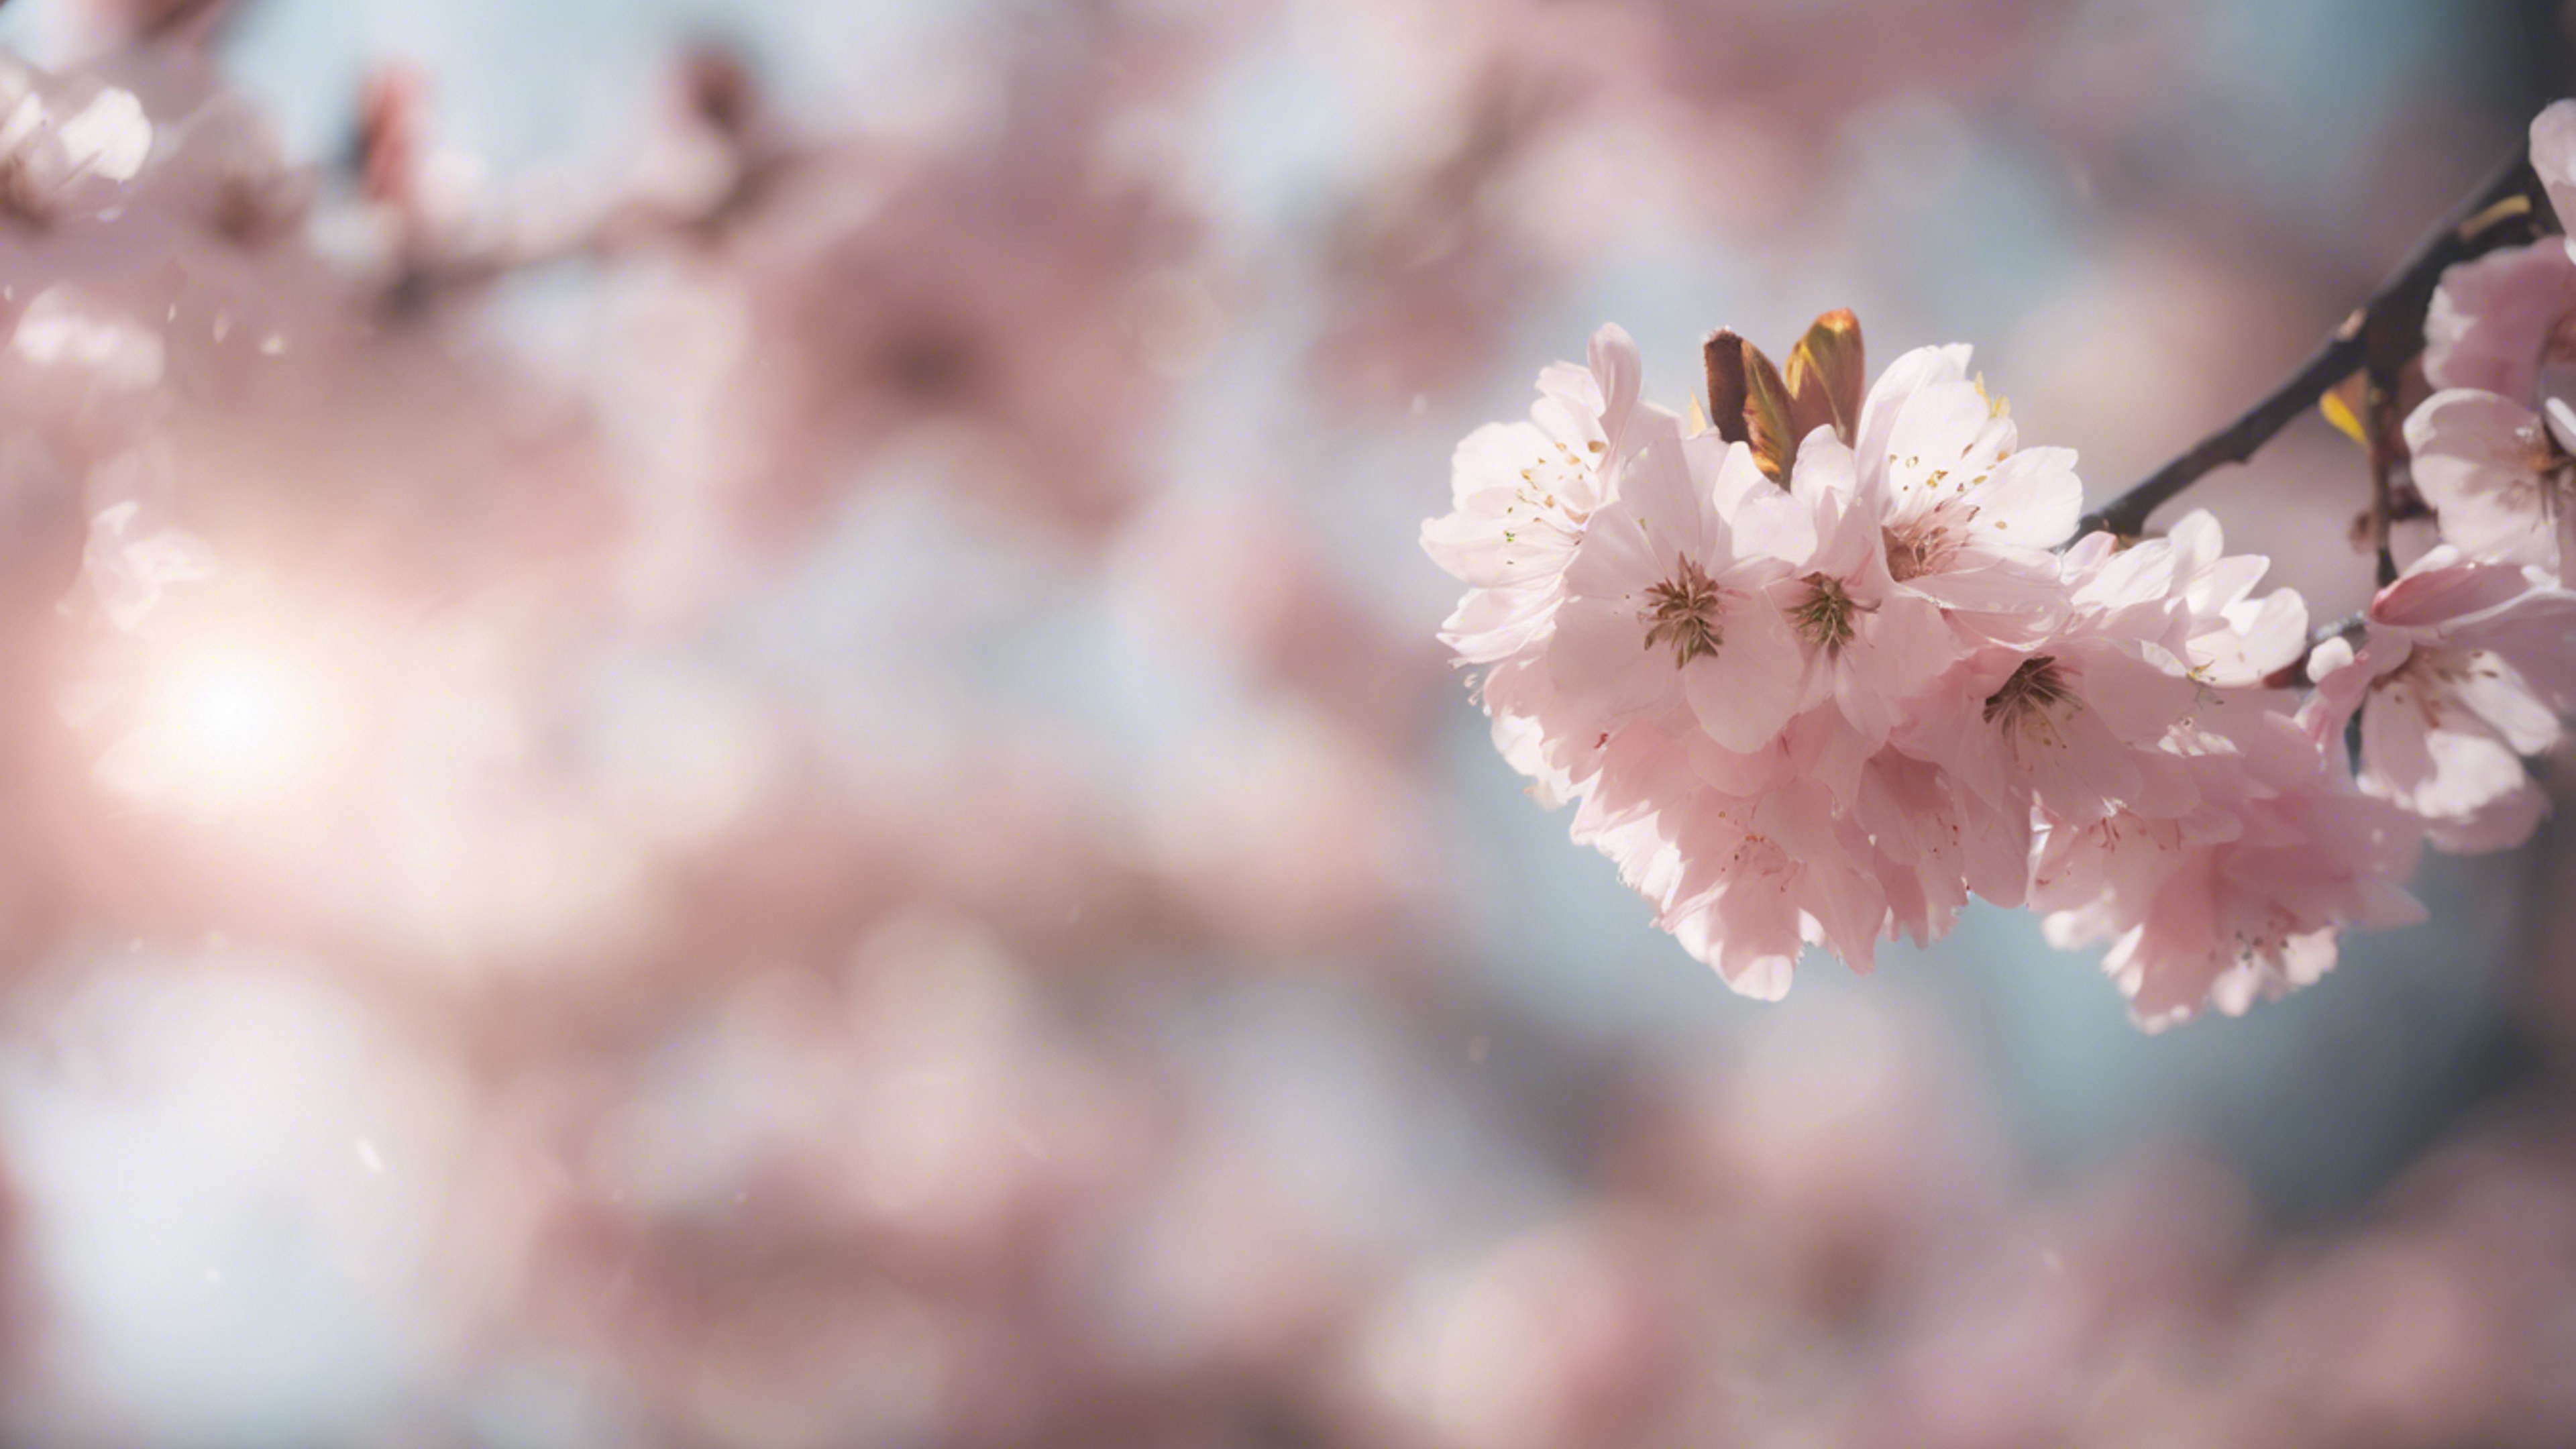 An ethereal dreamscape featuring cherry blossoms wafting in the soft spring breeze. Taustakuva[9de2e4f1deeb467ebab6]